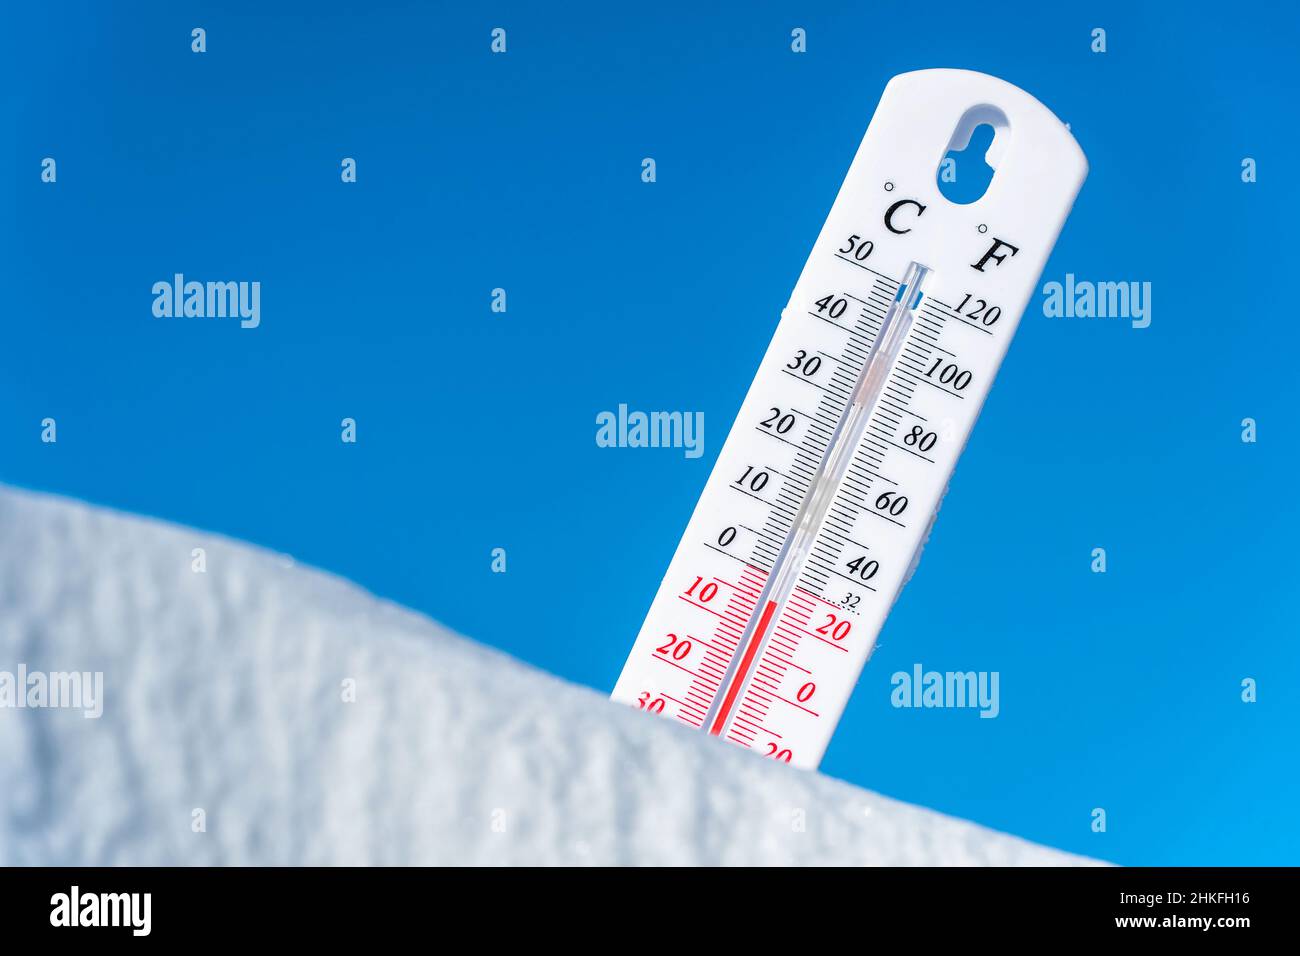 https://c8.alamy.com/comp/2HKFH16/thermometer-in-the-snow-climate-weather-forecast-temperatures-outside-thermometer-in-the-snow-shows-temperatures-below-zero-low-temperatures-in-2HKFH16.jpg